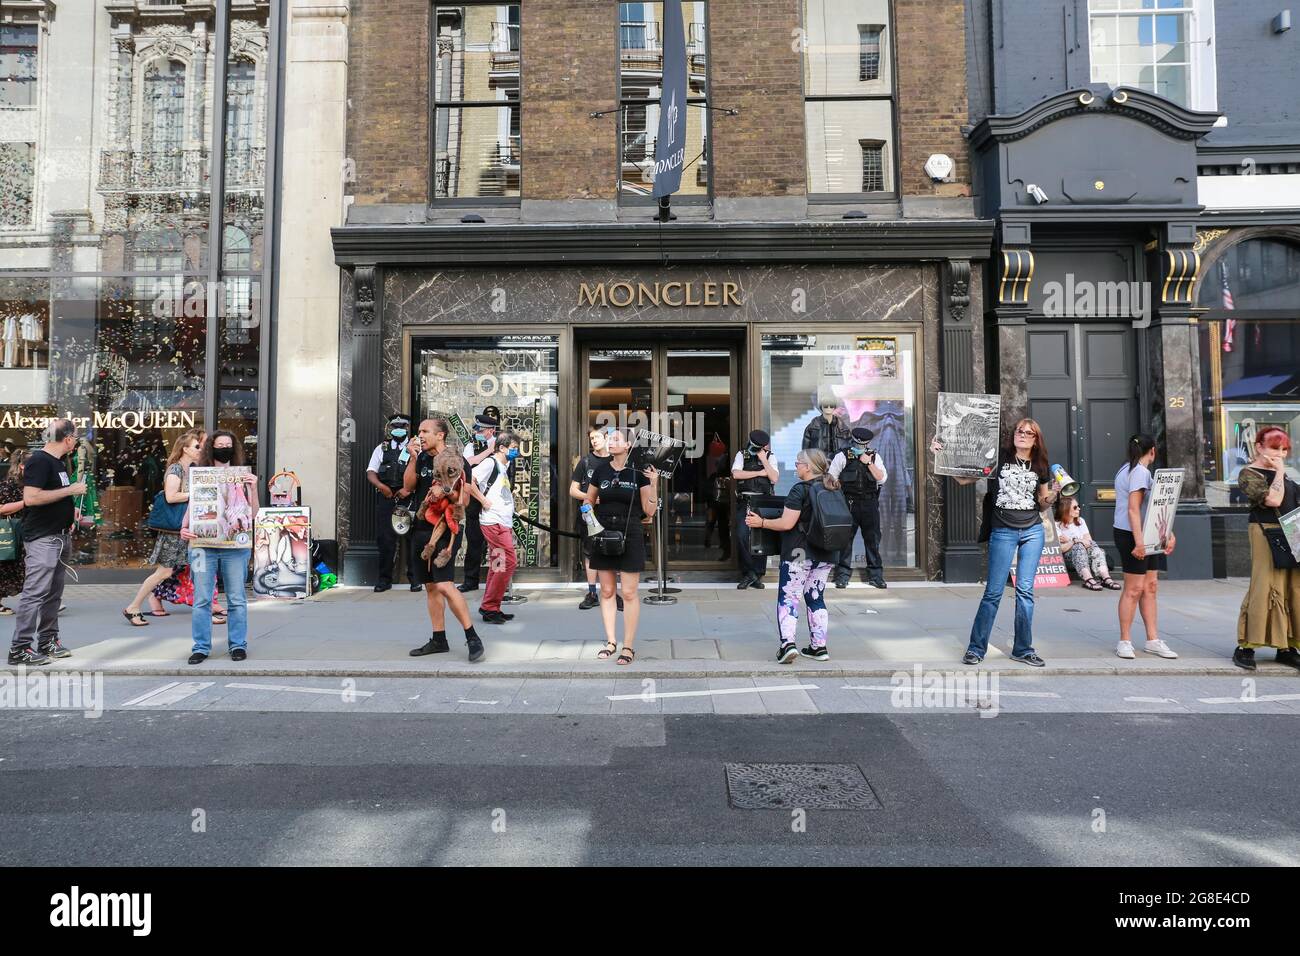 London, UK. 17 Jul 2021. First Anti-Fur protest outside MONCLER on Old Bond  Street organized by We Stand For the Animals. Credit: Waldemar Sikora Stock  Photo - Alamy